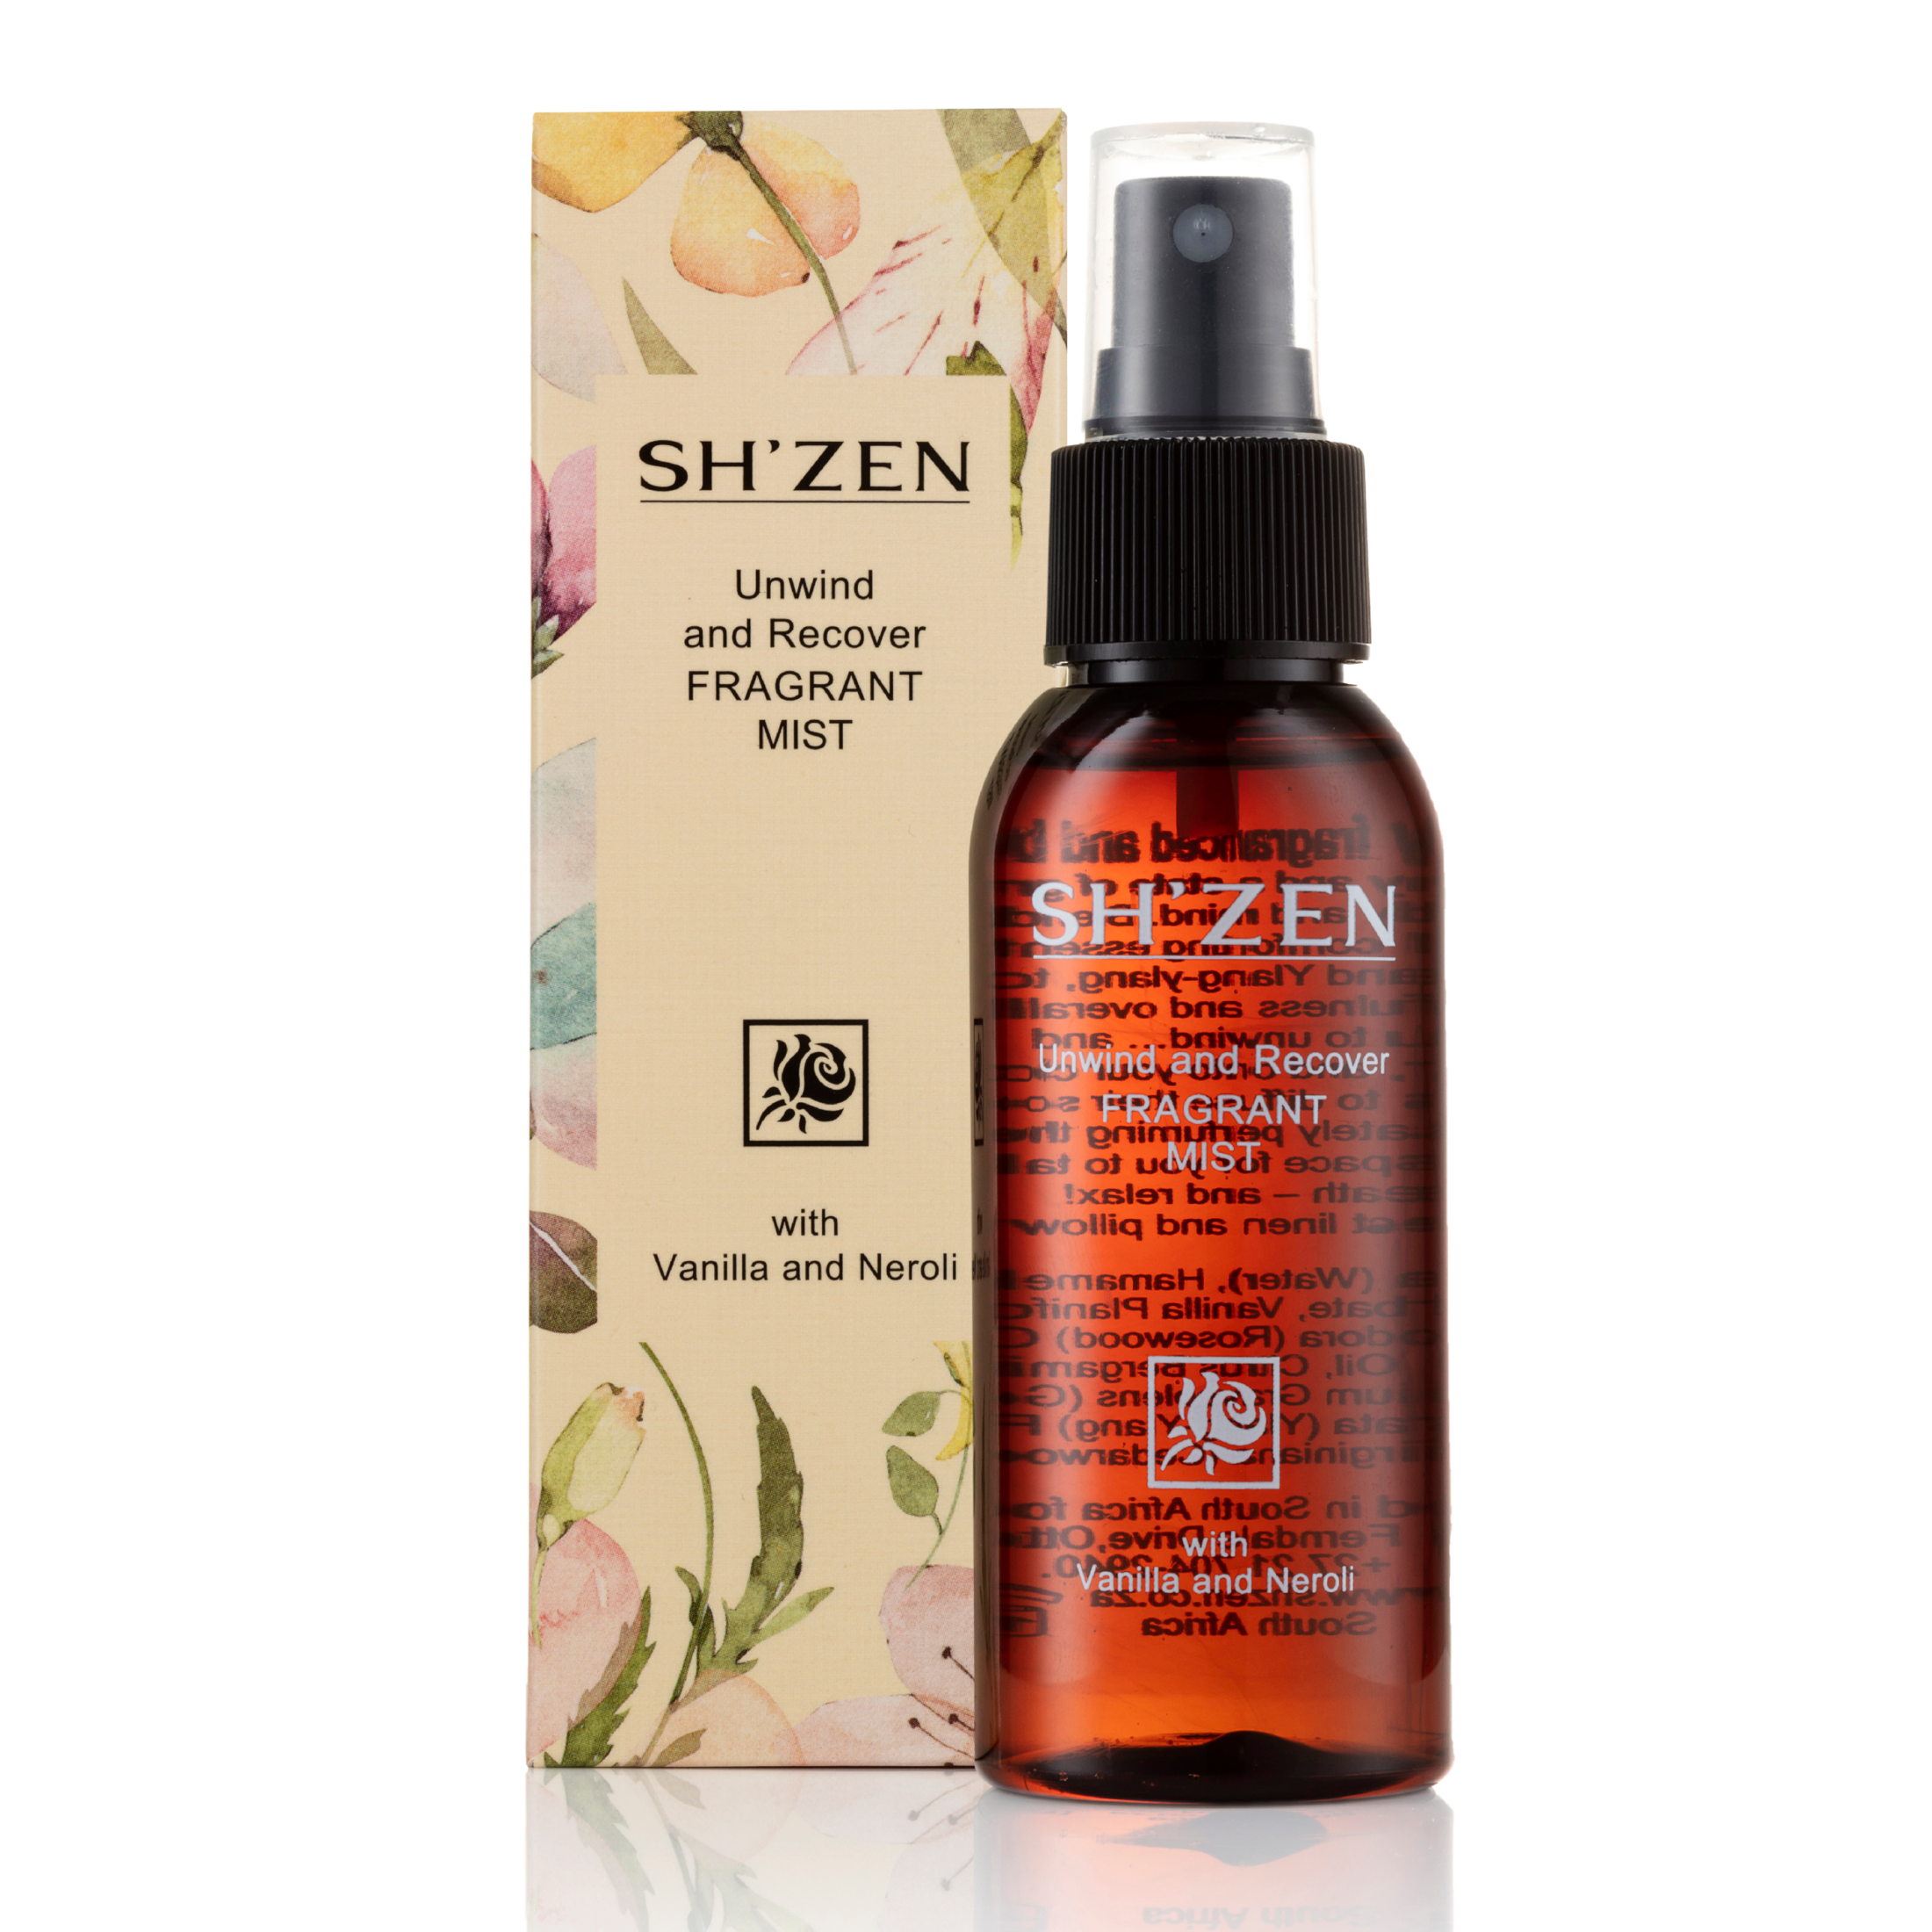 Unwind and Recover Fragrant Mist offers at R 239 in Sh'Zen